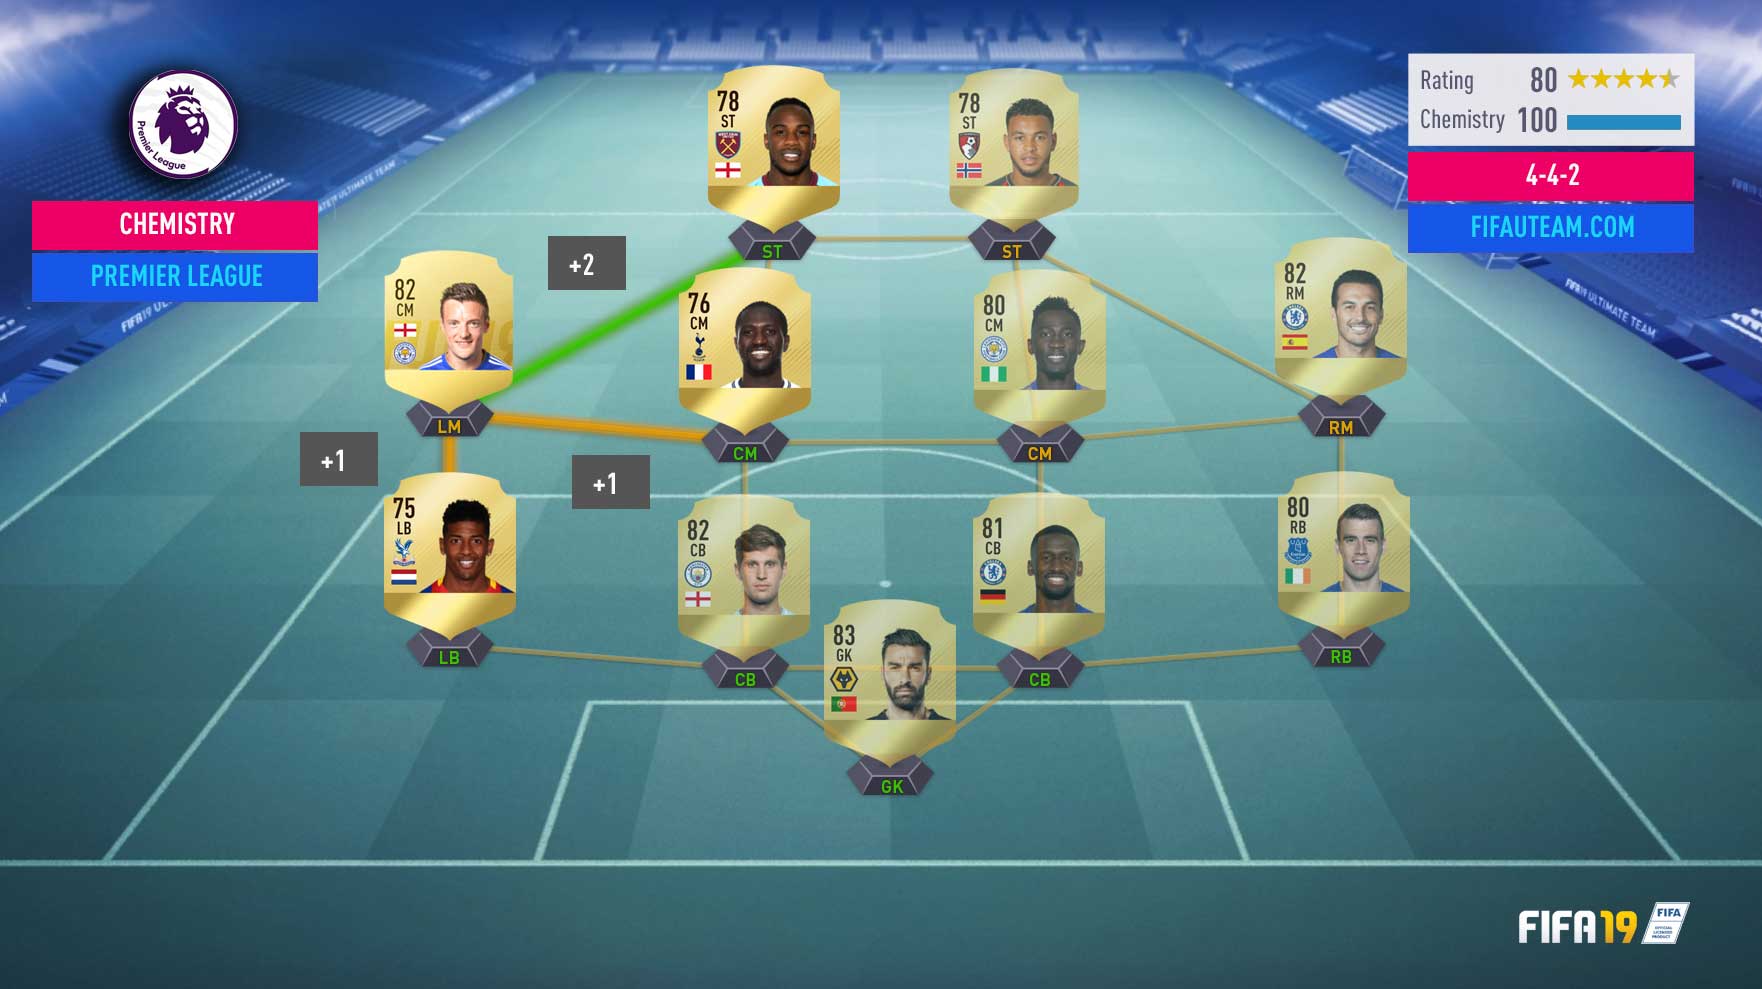 How is Chemistry Calculated in FIFA 19 Ultimate Team